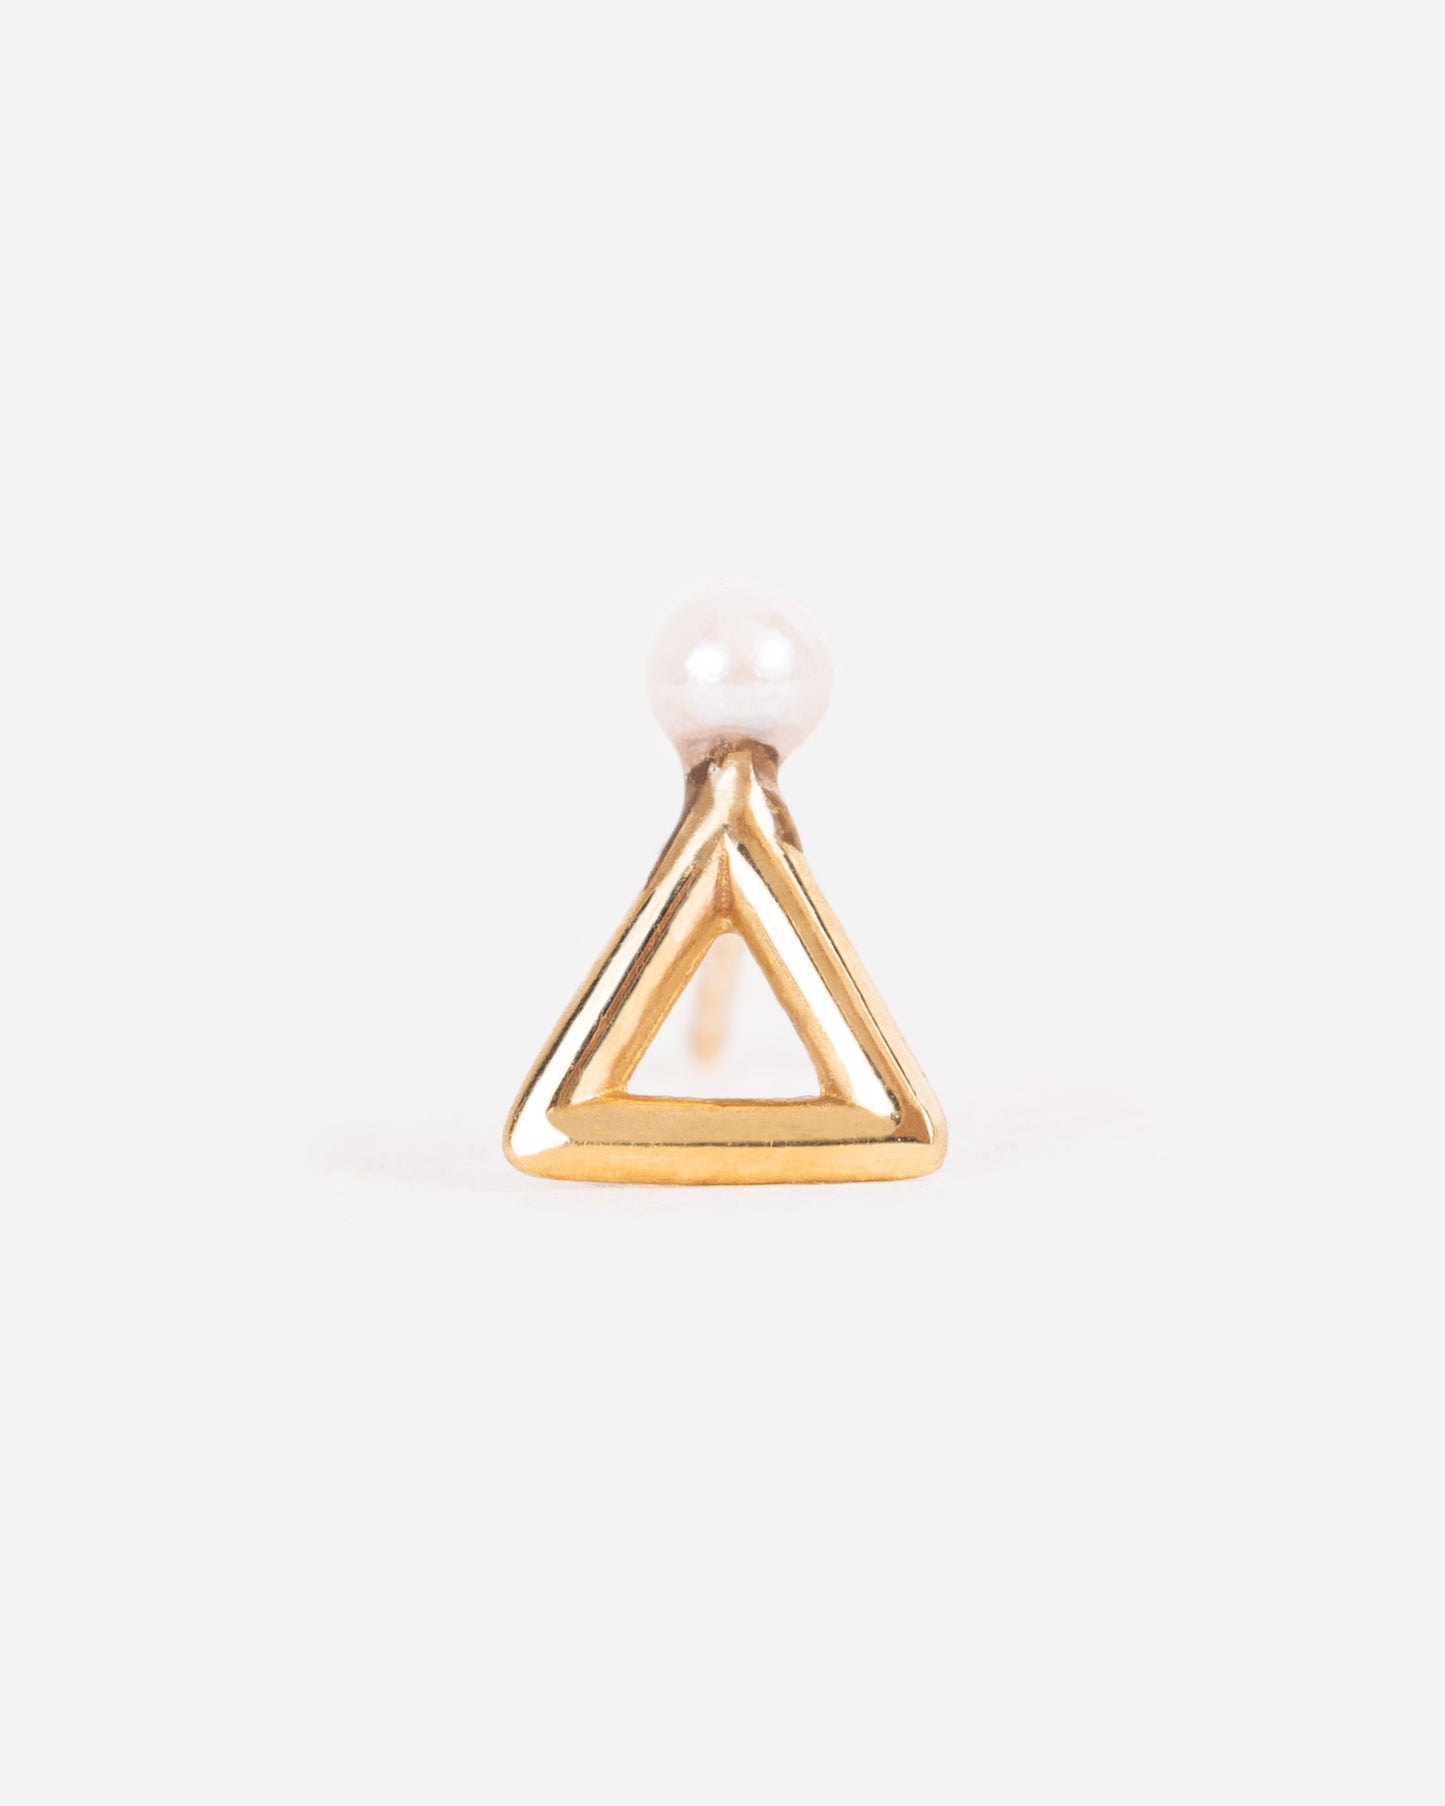 A single earring, the face is a yellow gold open triangle with a seed pearl on top.